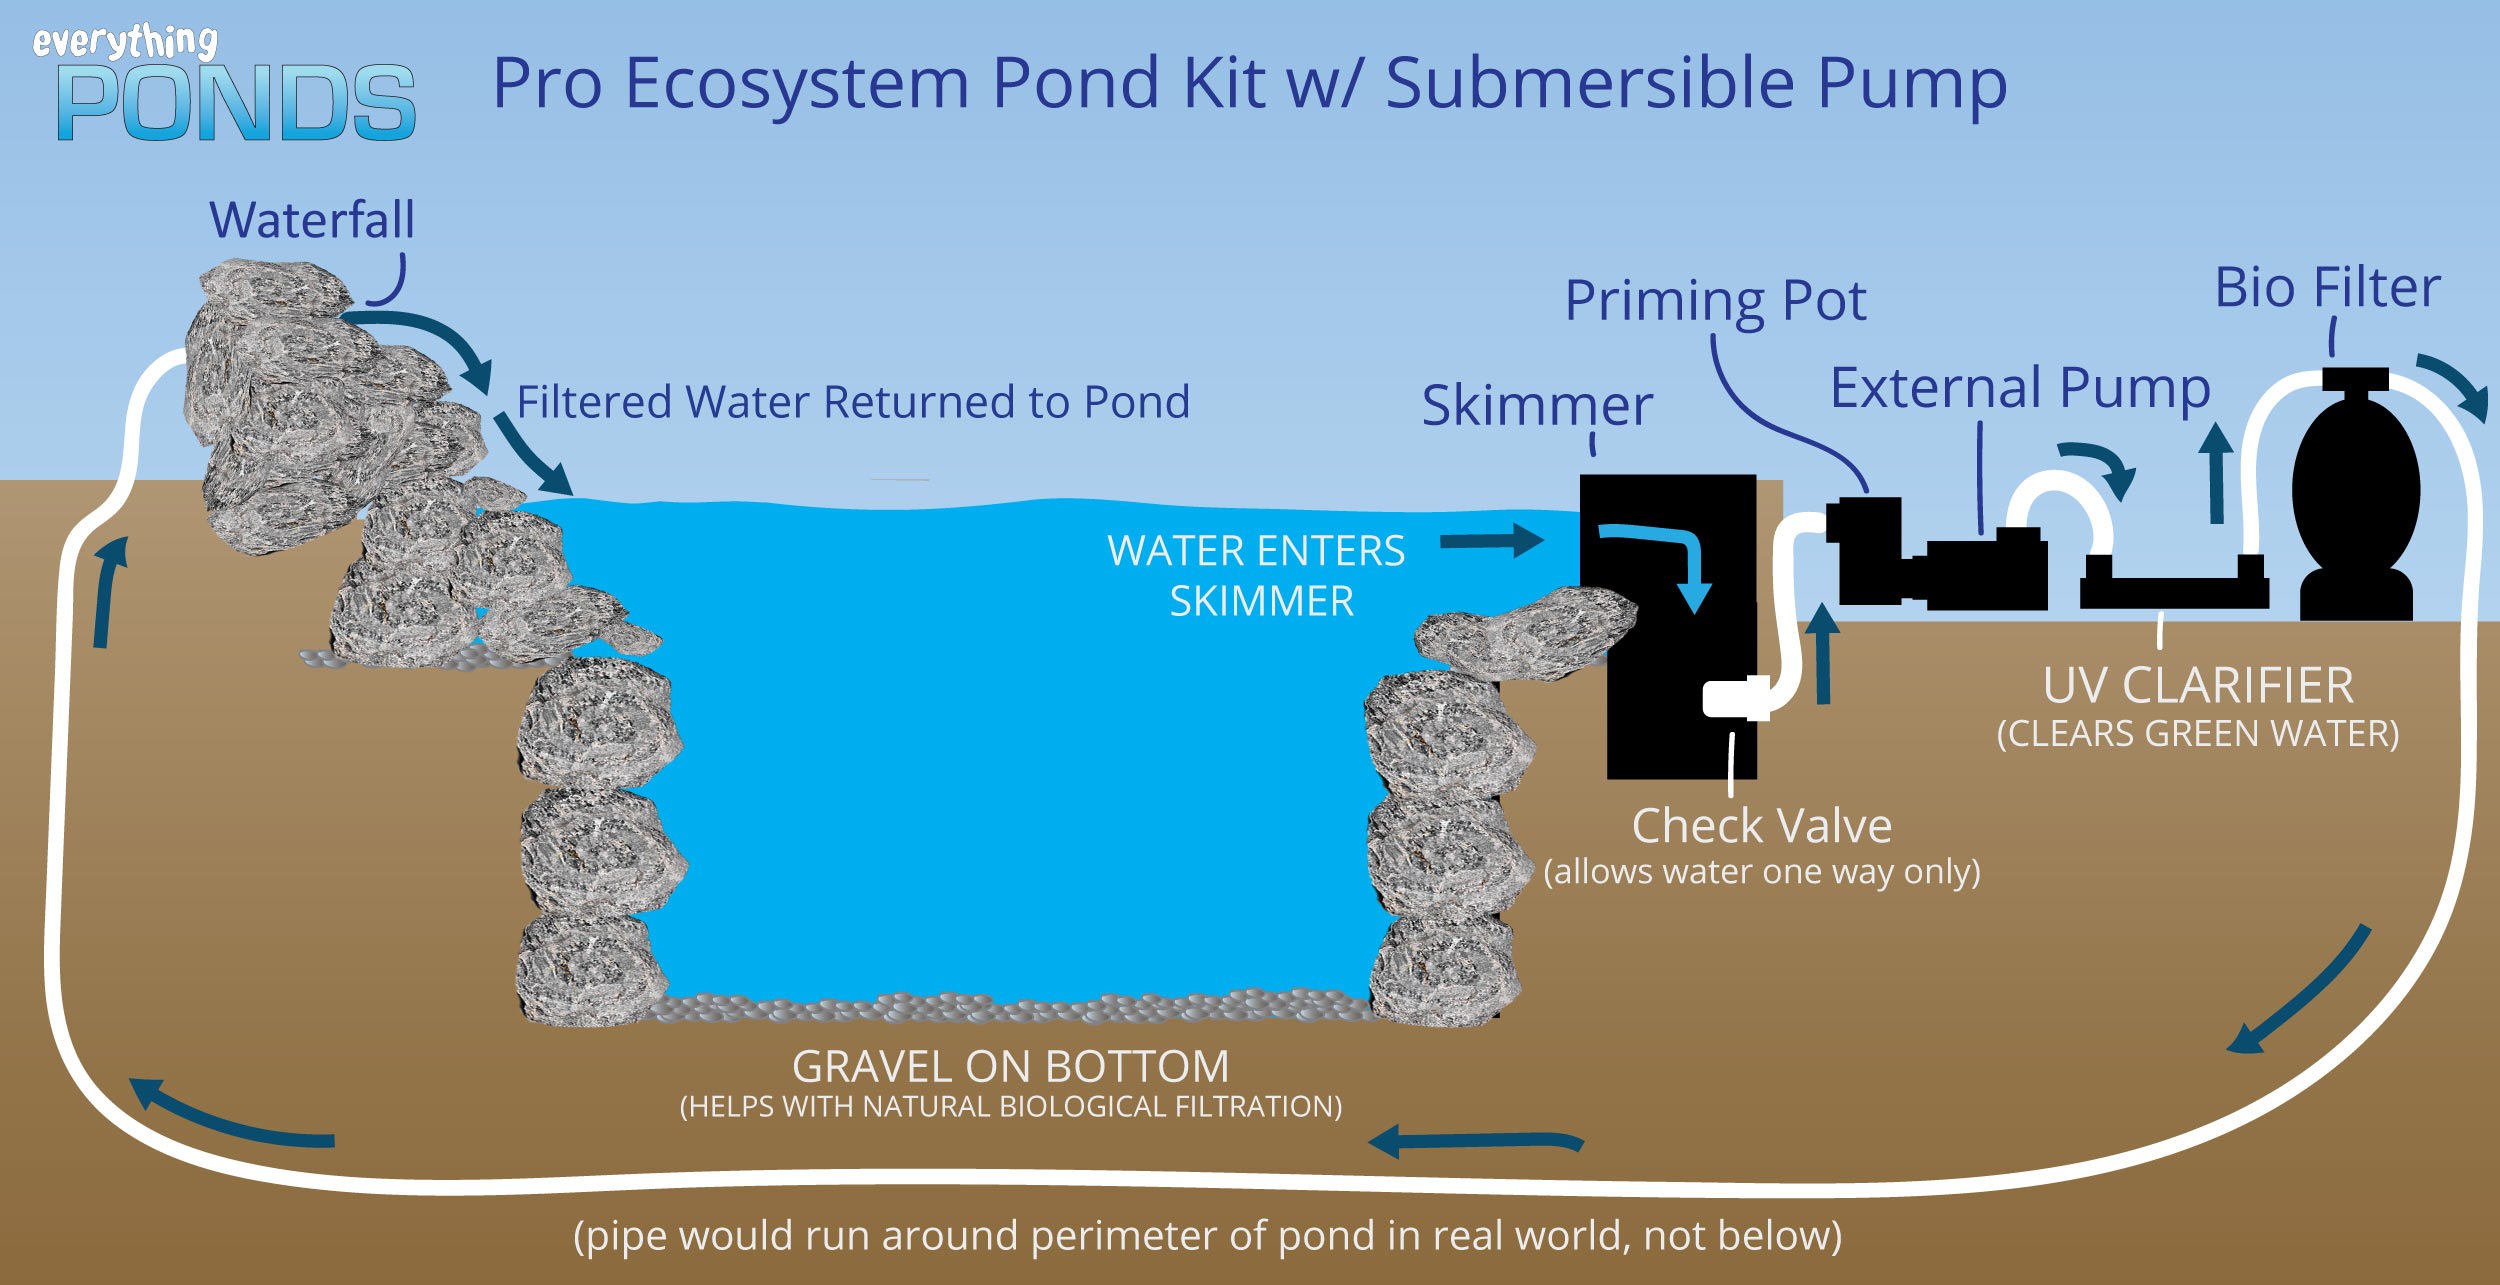 Pond Drawing - Pro Ecosystem Pond - External Pump without waterfall spillway